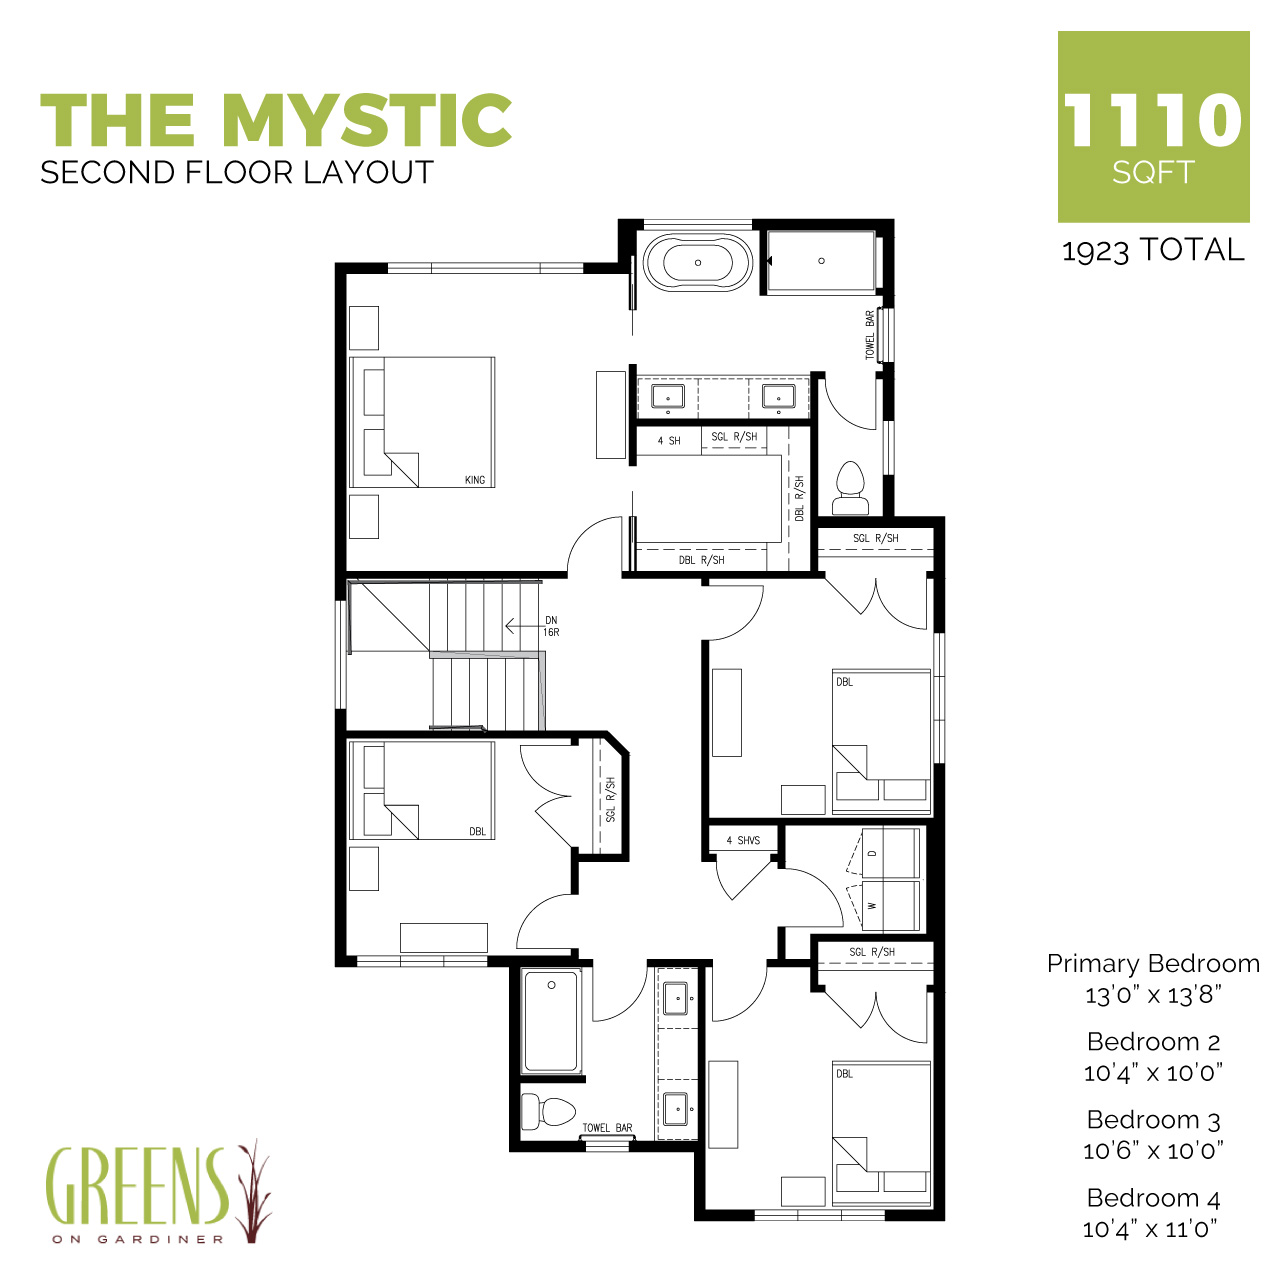 A second floor layout showing 4 bedrooms, two bathrooms and upstairs laundry.